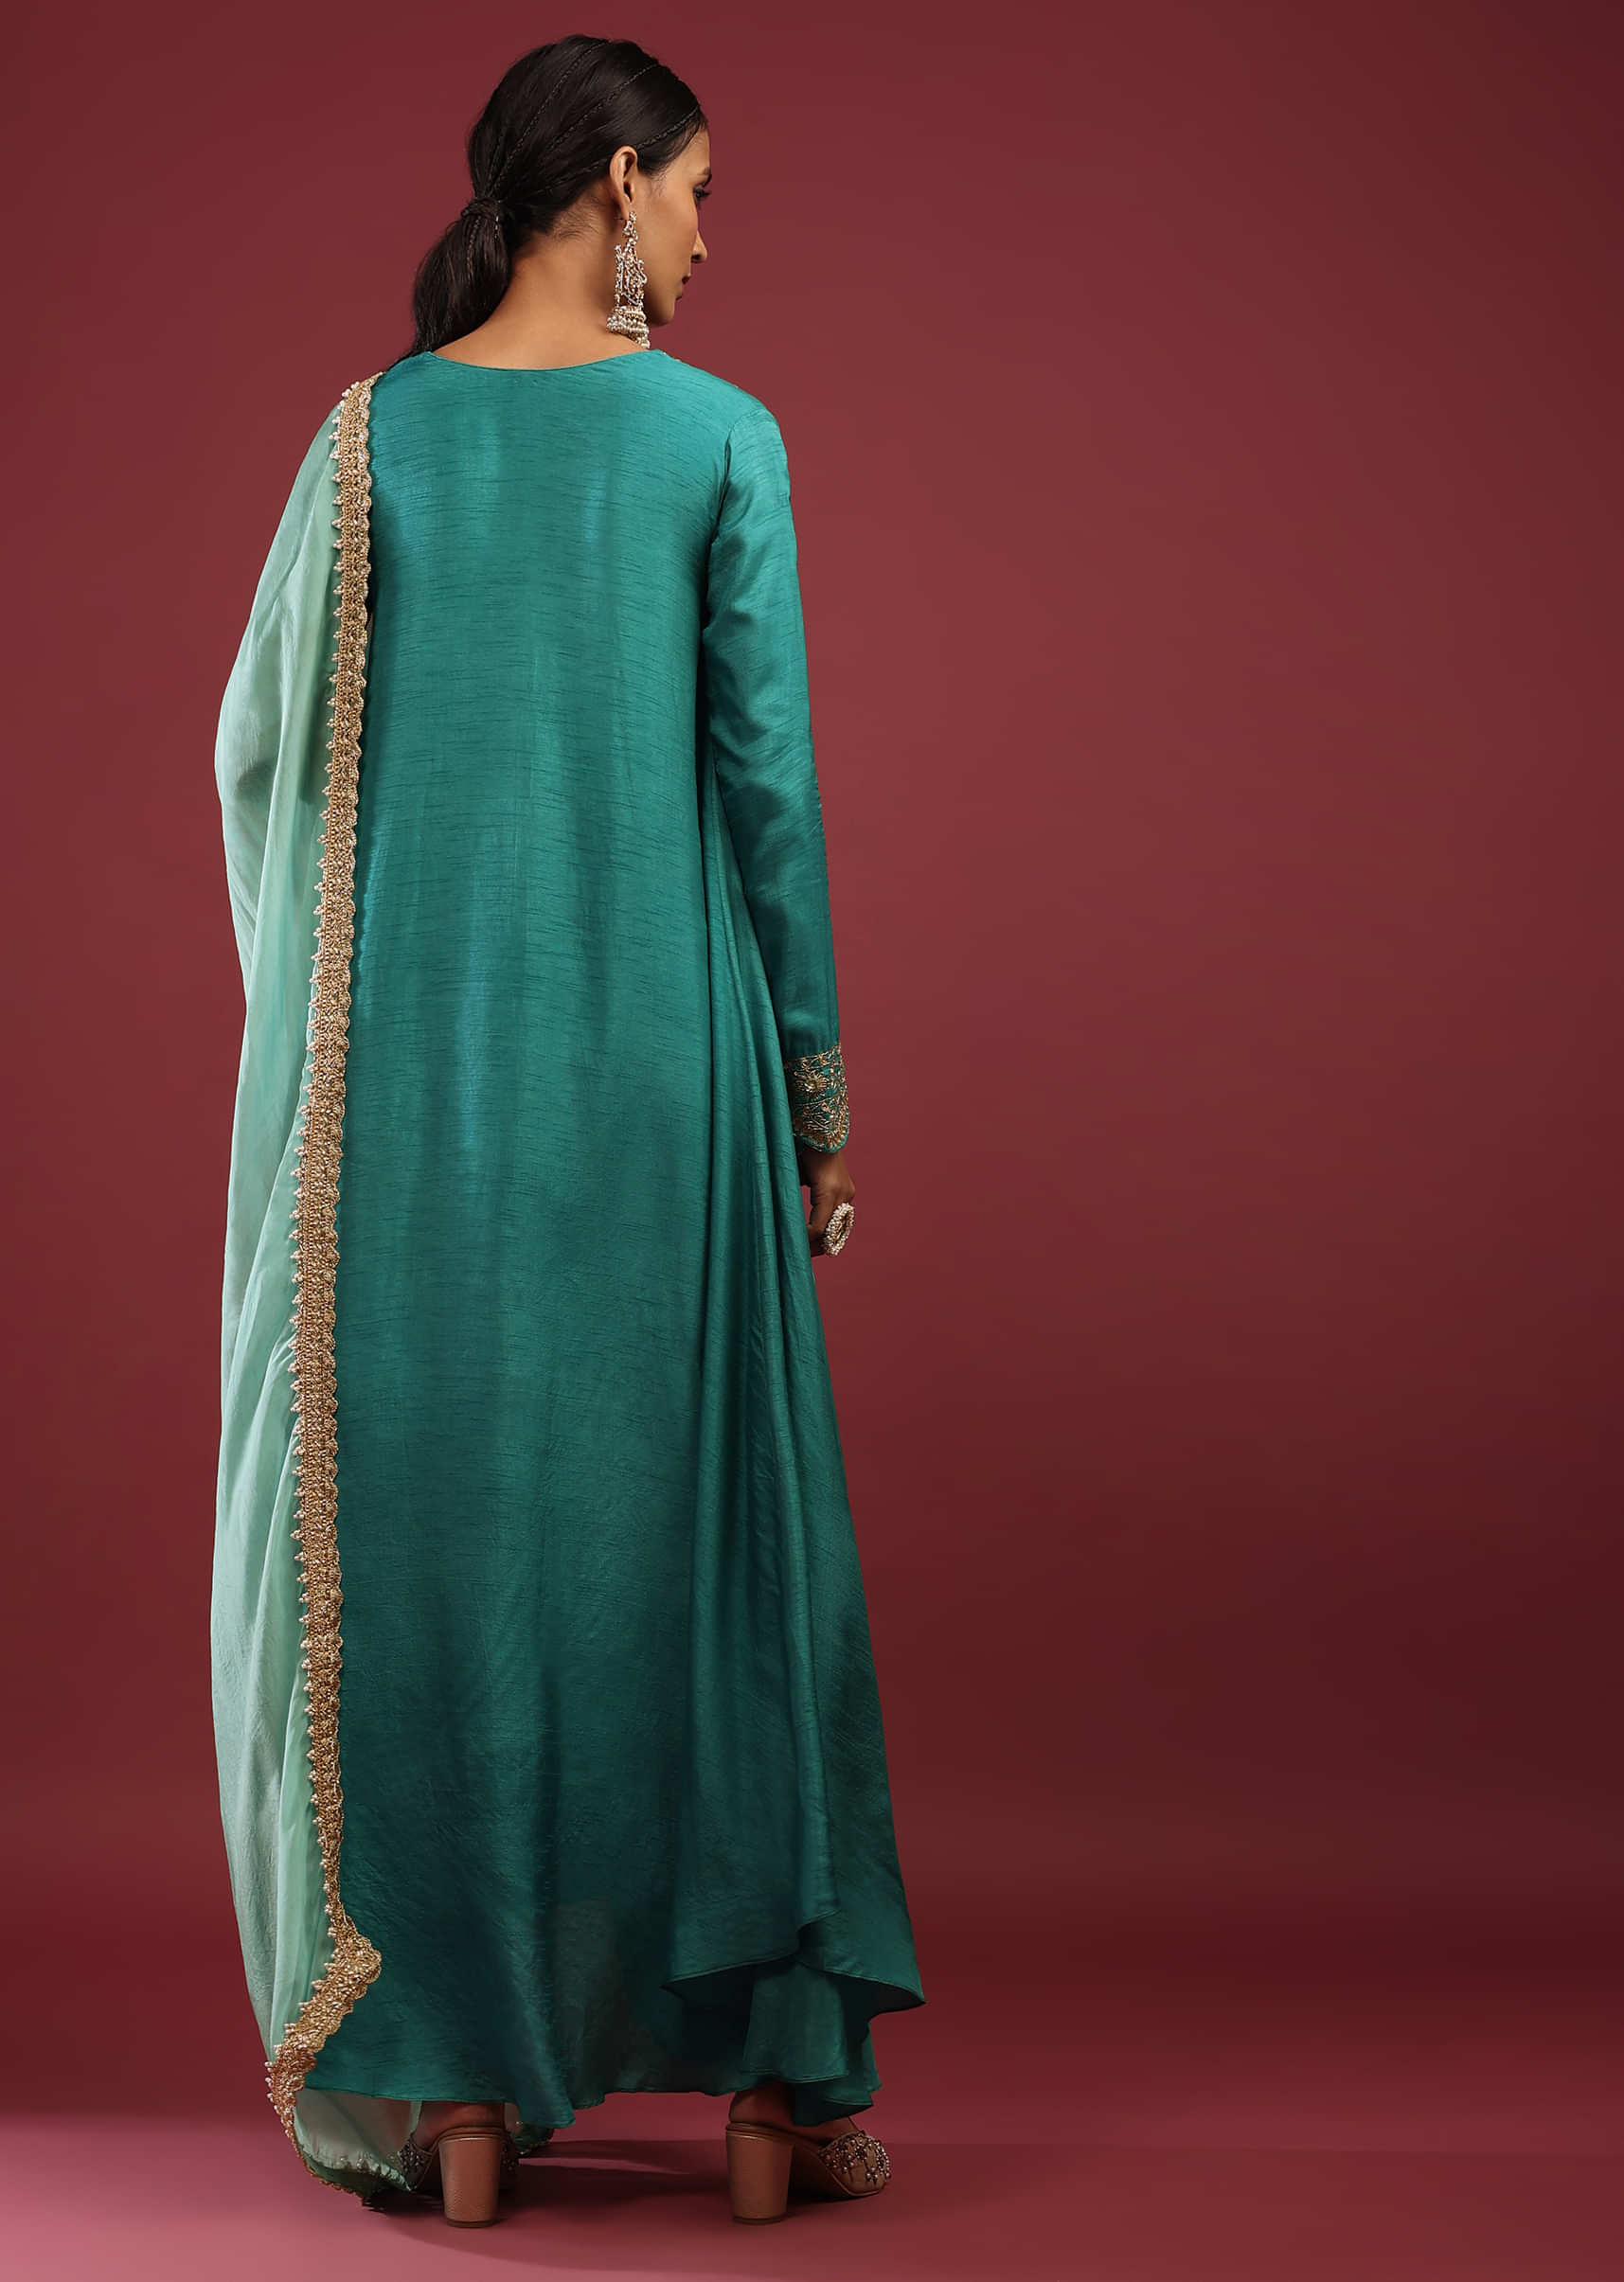 Mint Blue A Line Suit With Zardosi Embroidered Bird Motifs And Mint Dupatta